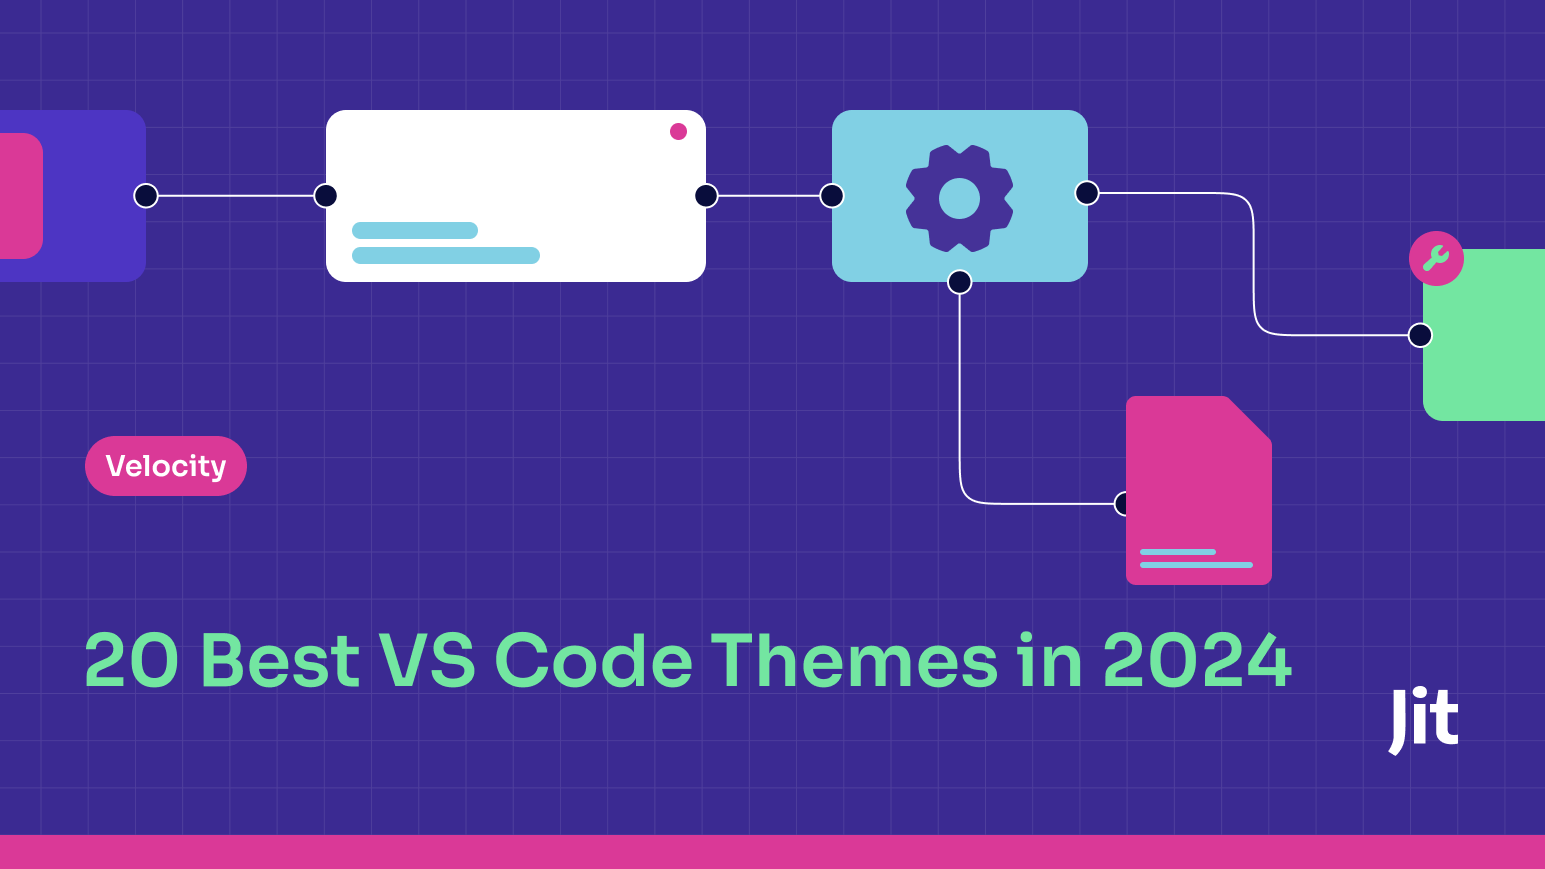 20 Best VS Code Themes in 2024